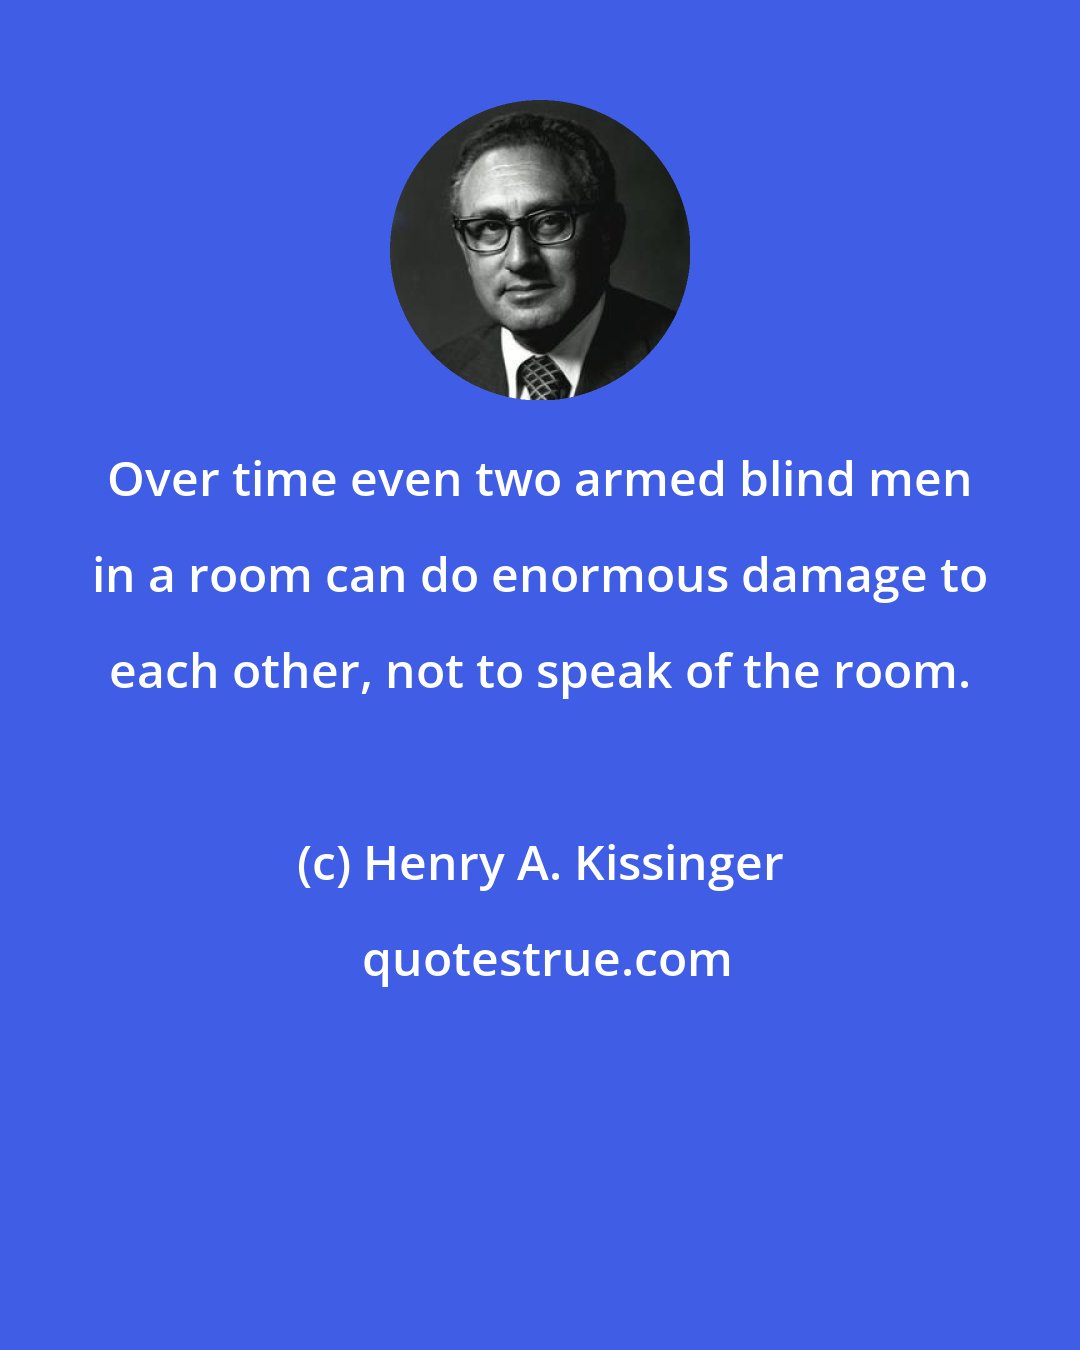 Henry A. Kissinger: Over time even two armed blind men in a room can do enormous damage to each other, not to speak of the room.